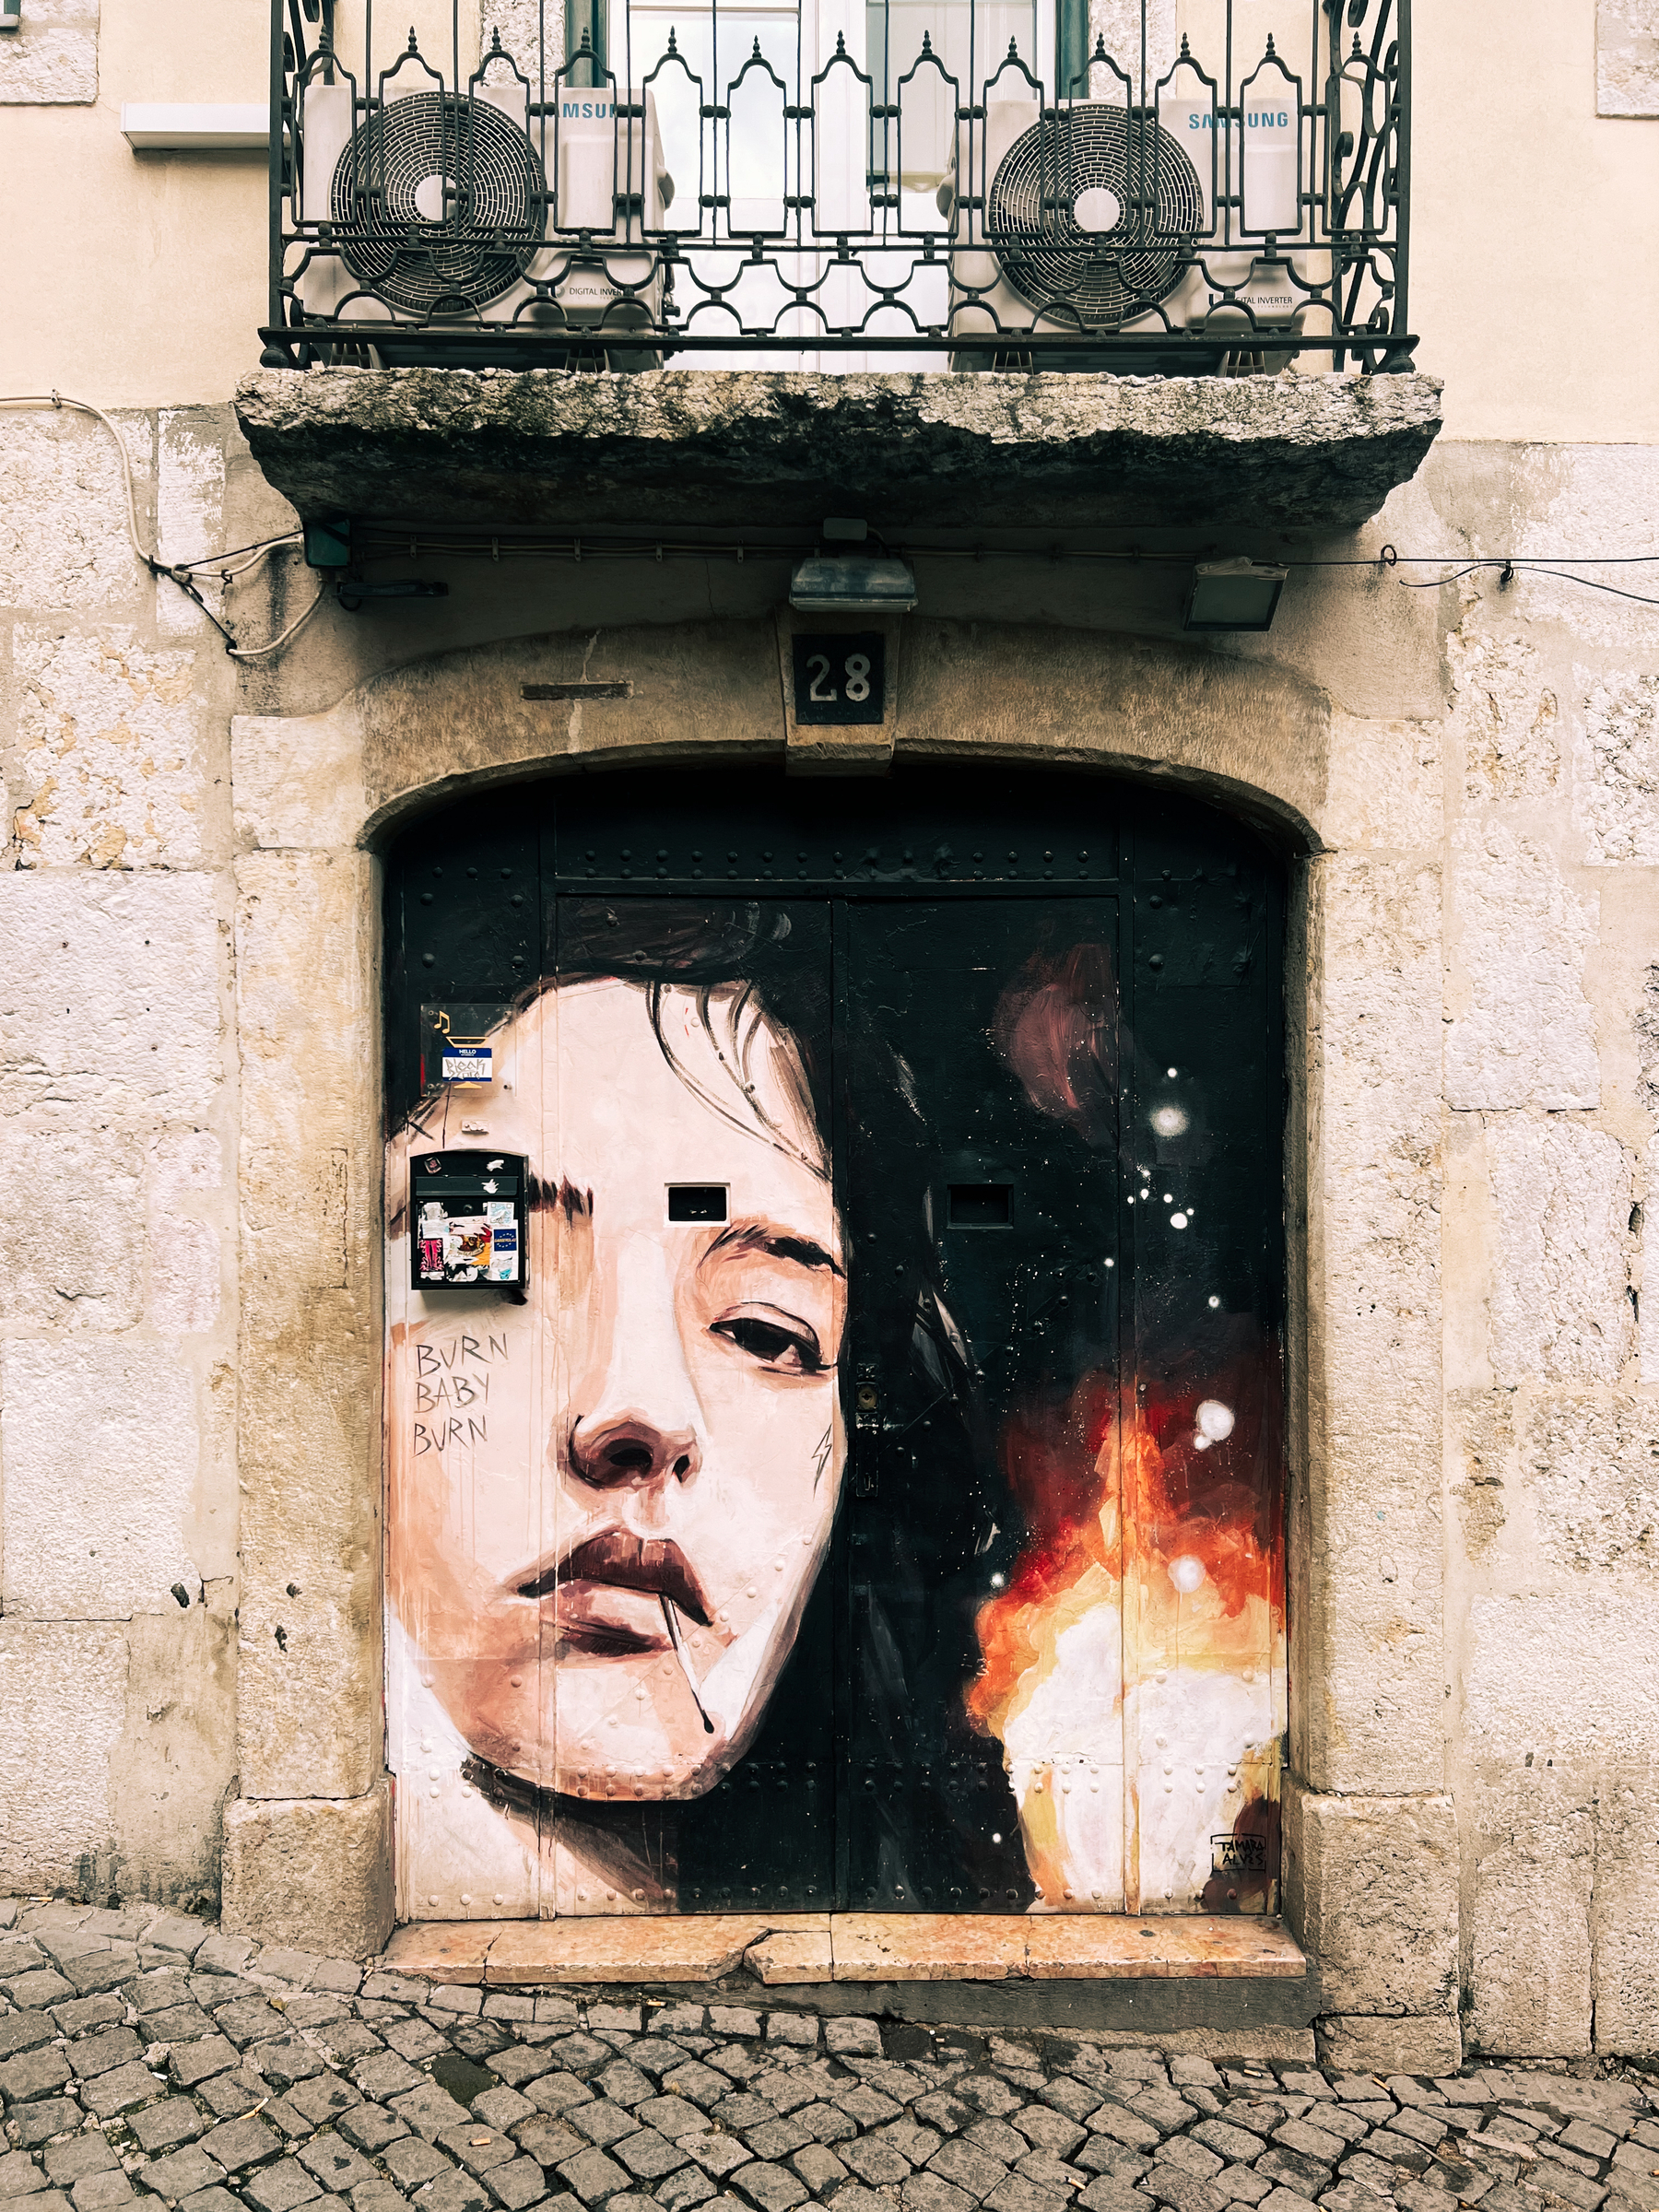 A street art mural painted on a door depicting a woman&rsquo;s face with a match stick, alongside fiery imagery and the words &ldquo;BURN BABY BURN.&quot;